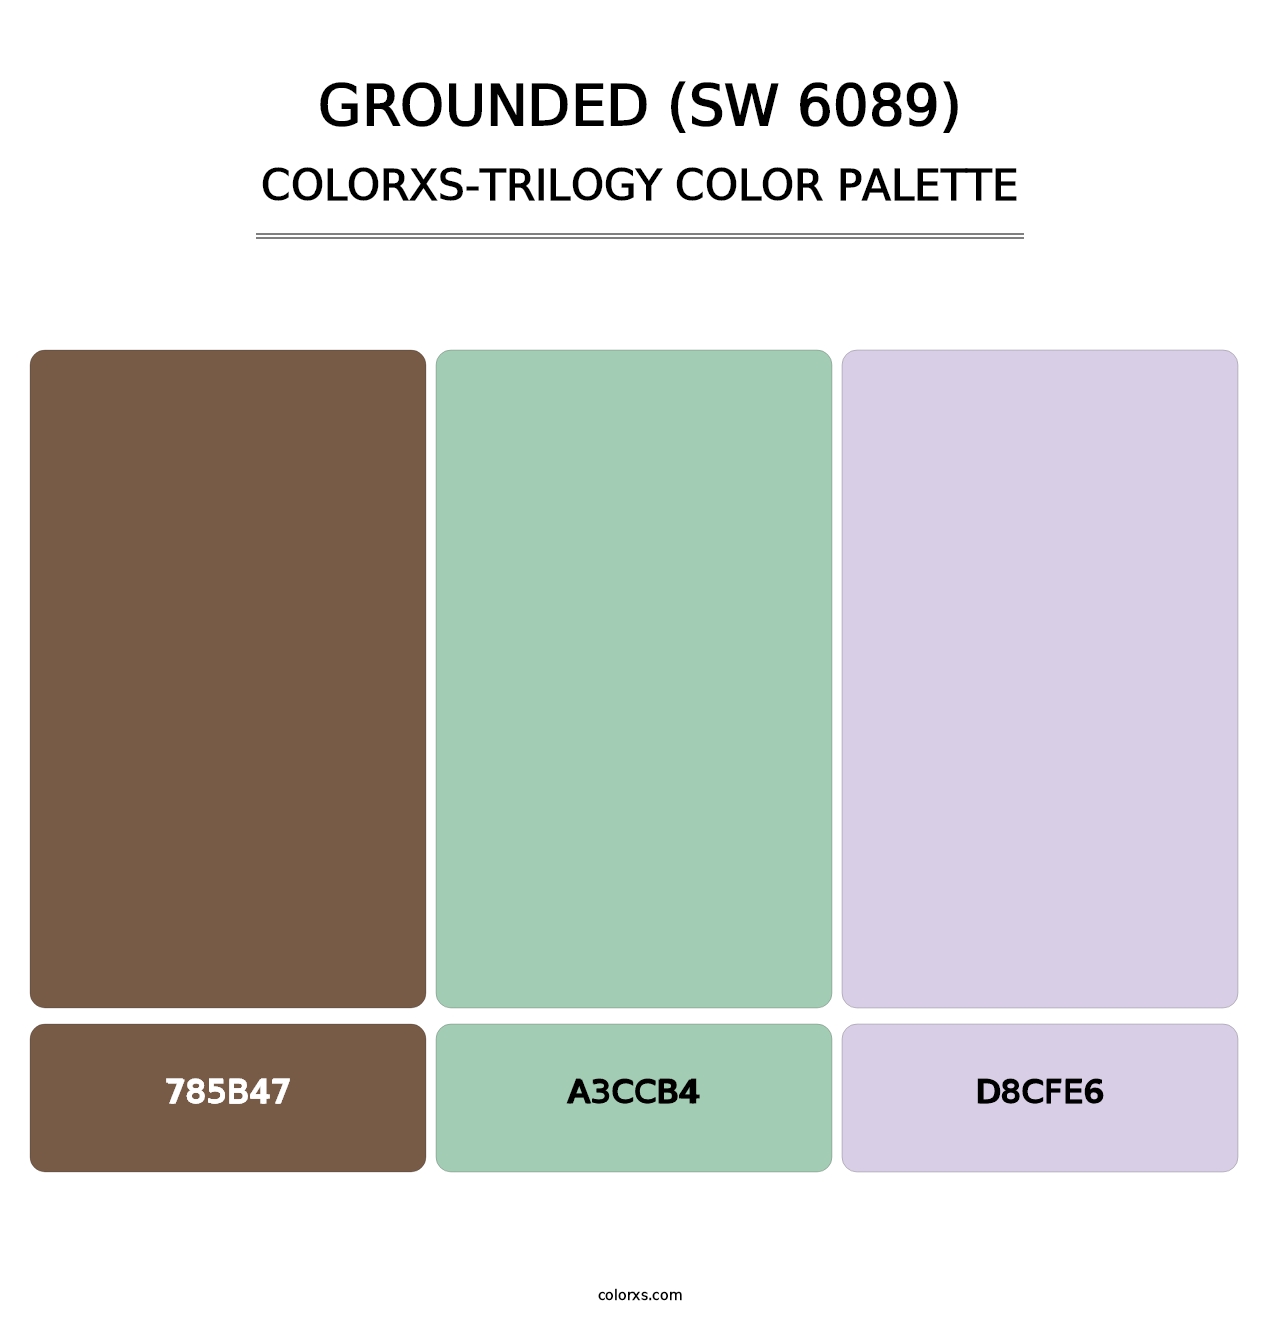 Grounded (SW 6089) - Colorxs Trilogy Palette